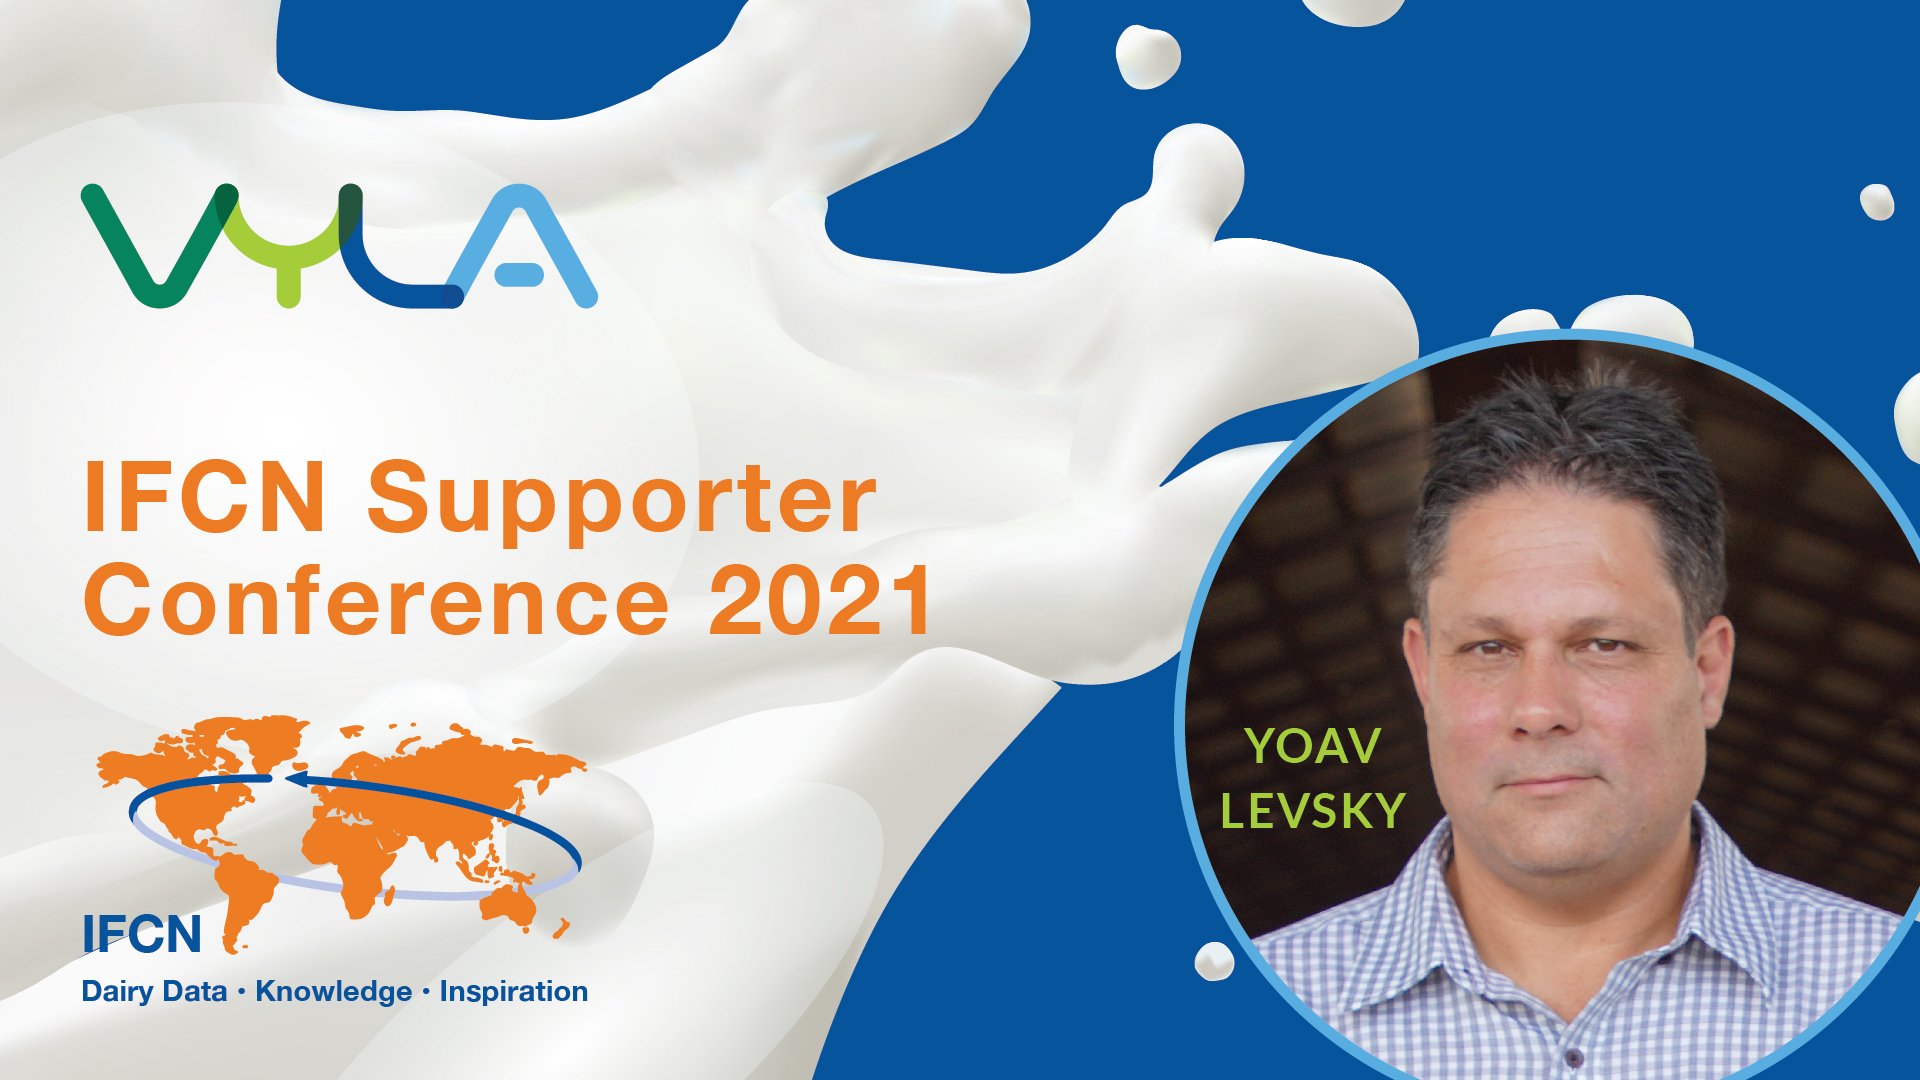 Vyla’s Yoav Levsky sits down at the IFCN Dairy Supporter Conference to talk